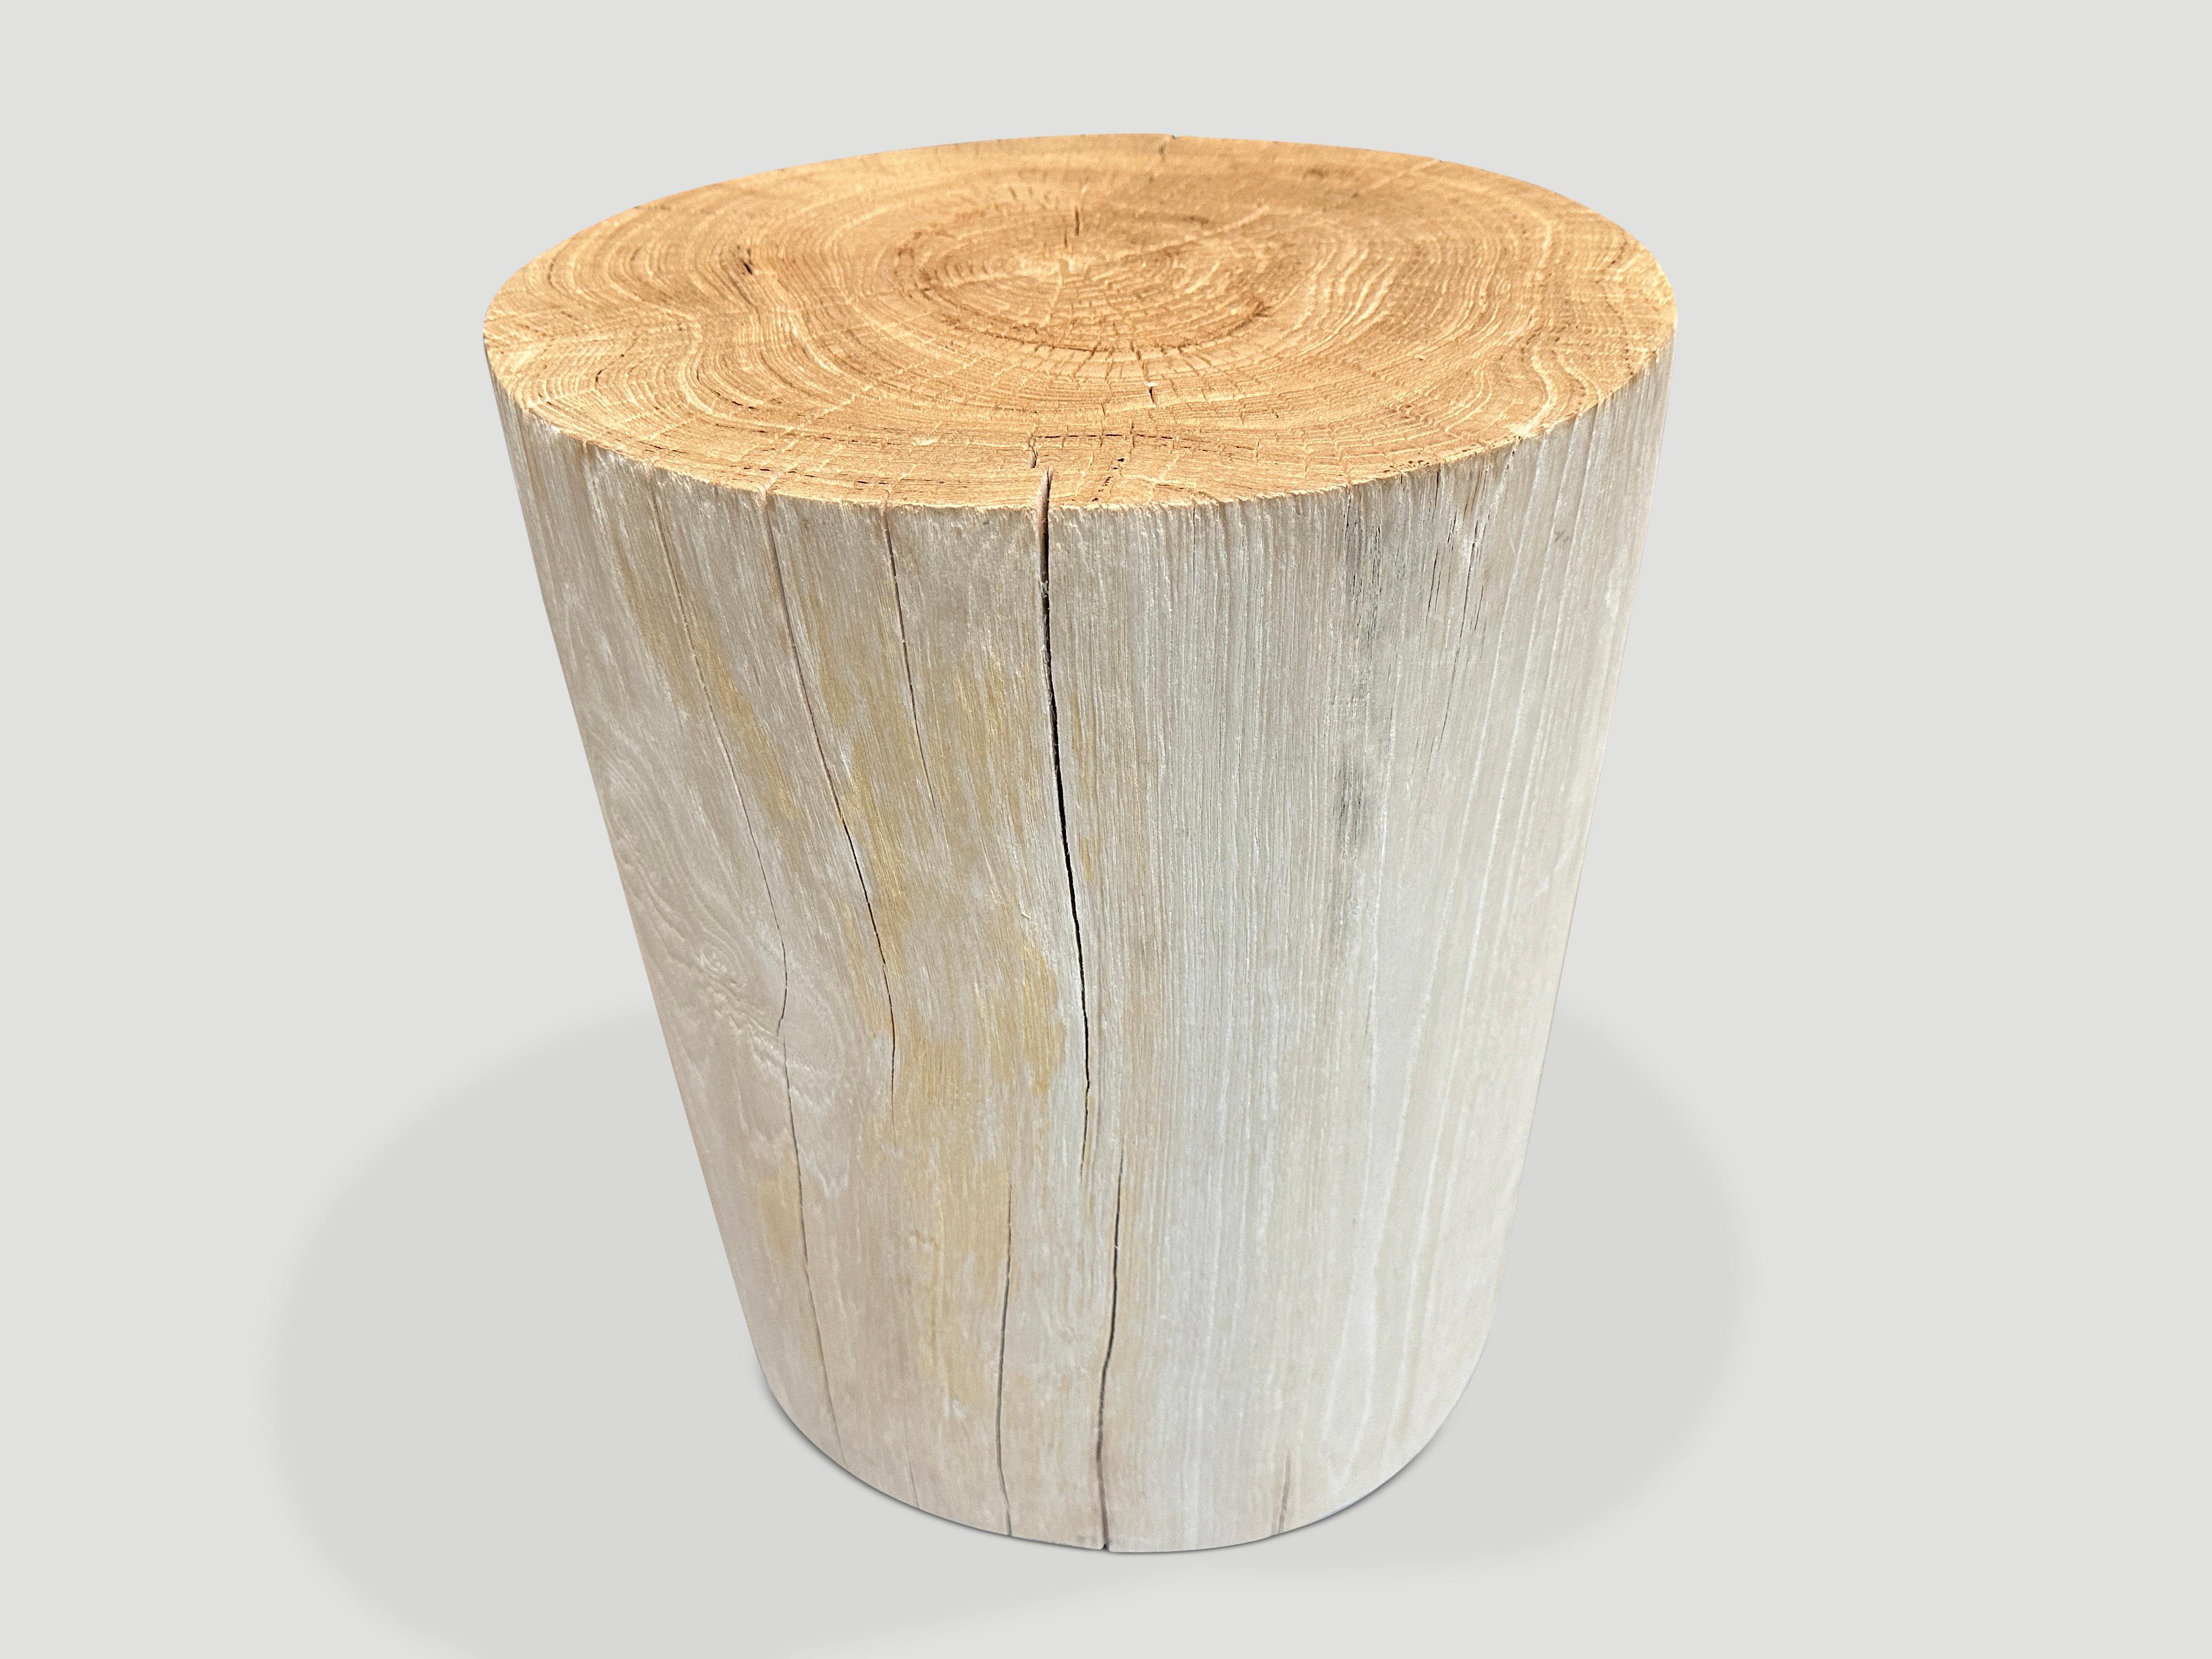 Reclaimed teak wood side table or stool. Bleached and carved into a minimalist cylinder whilst respecting the natural organic wood. Also available charred. We have a collection. Please inquire. The images reflect the one shown.

The St. Barts